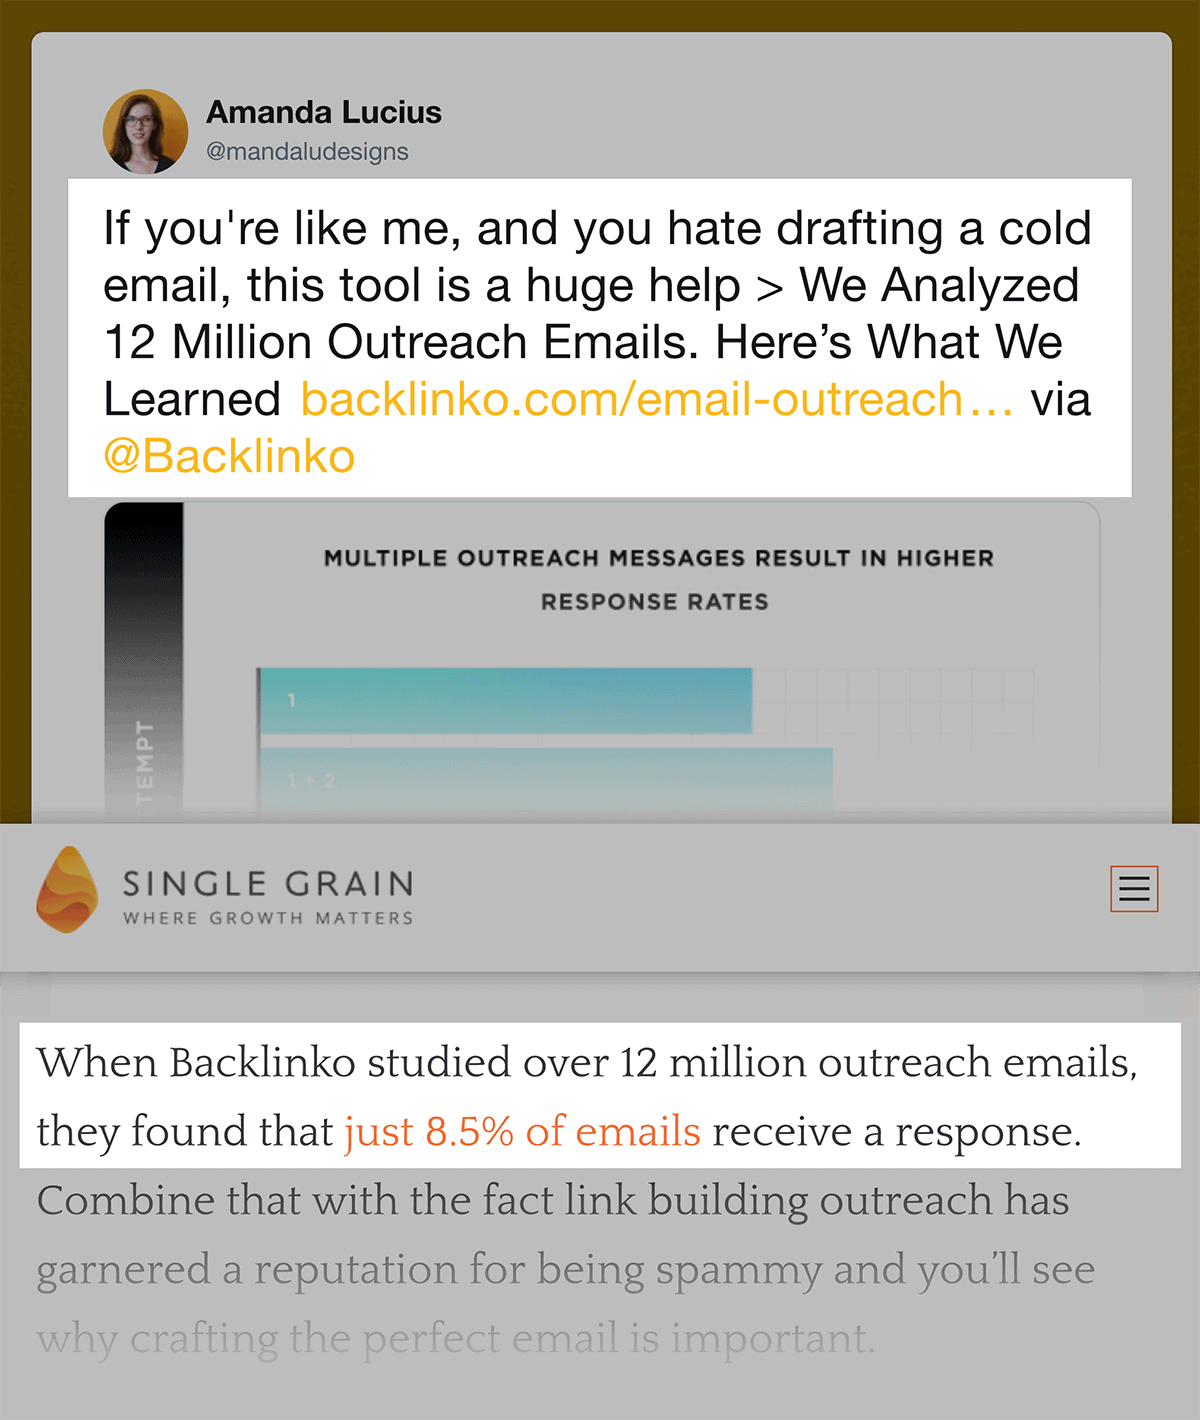 Outreach email post shares